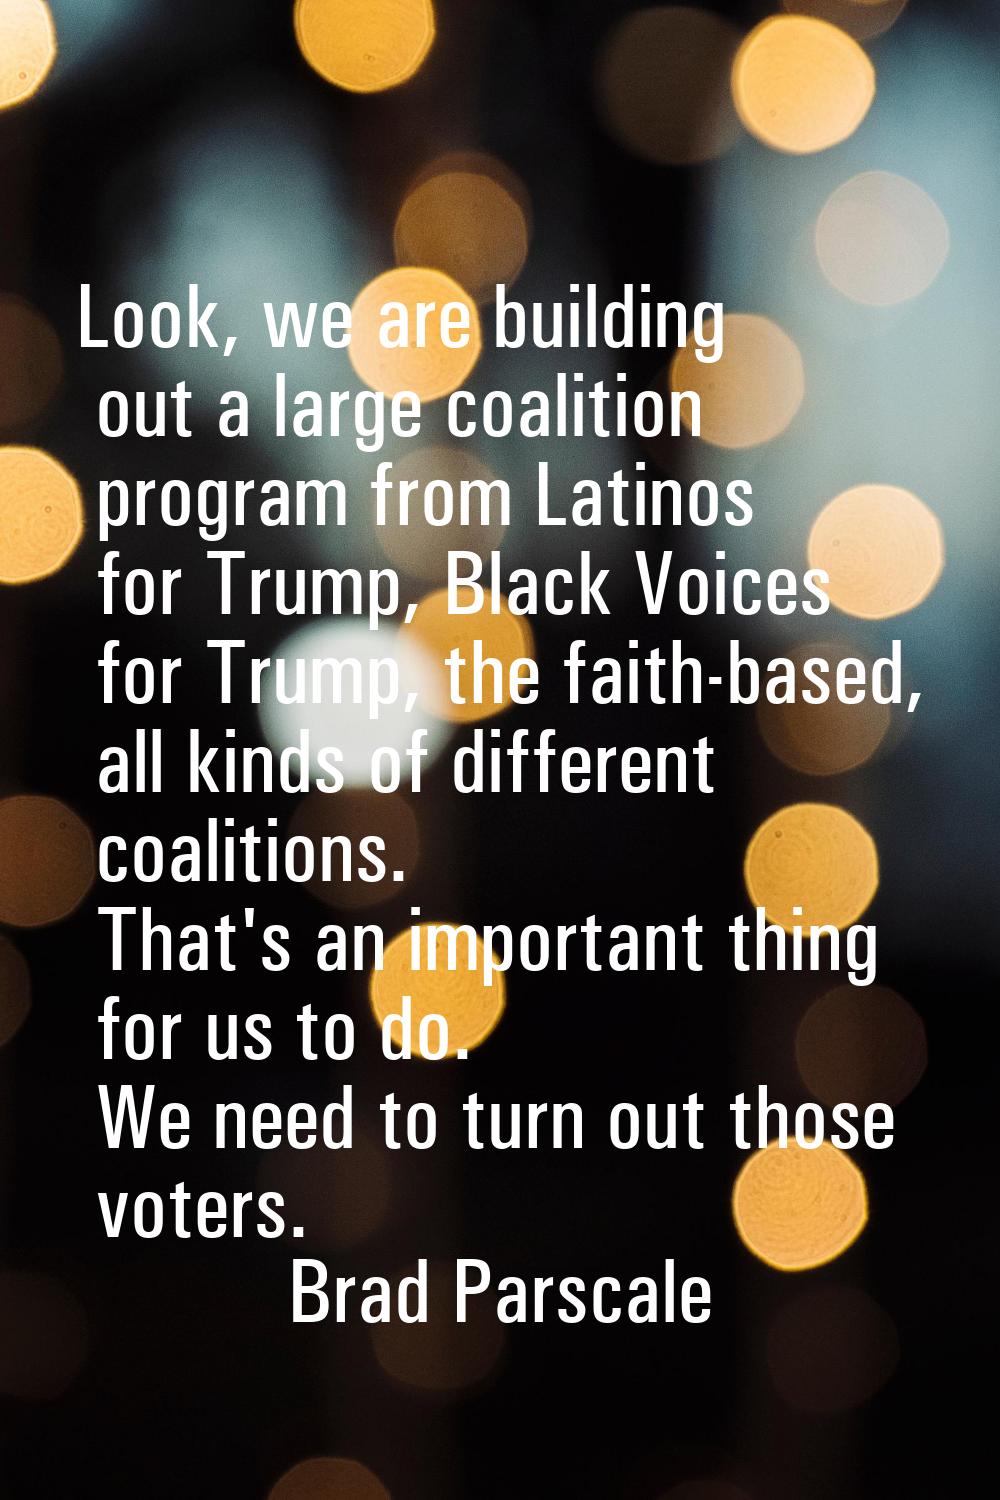 Look, we are building out a large coalition program from Latinos for Trump, Black Voices for Trump,